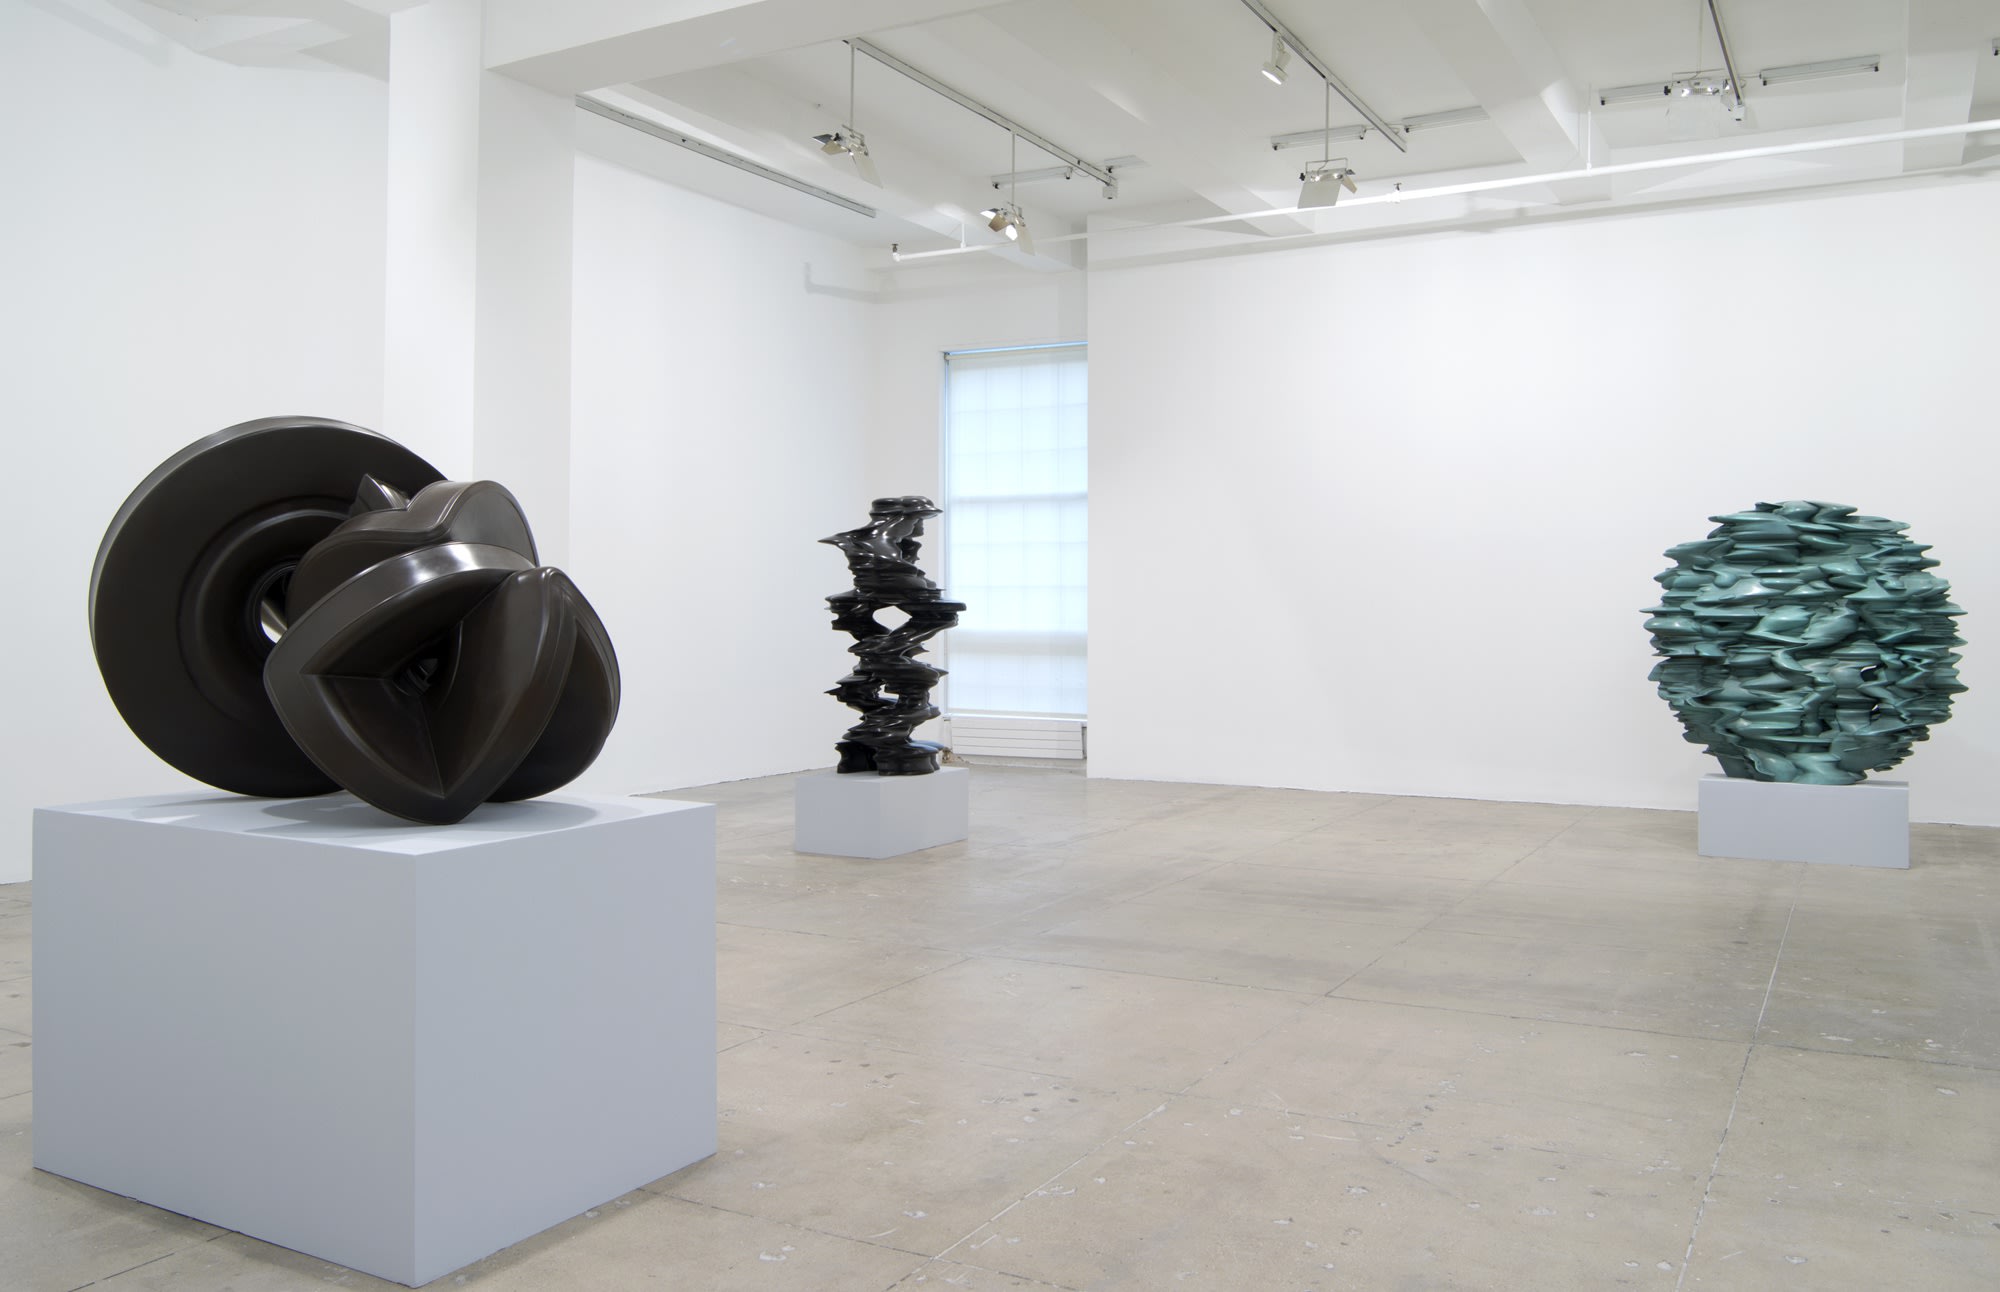 Three abstract sculptures sit on pedestals in a large white room. The one on the right is spherical and light blue-green; the other two are dark grey. 